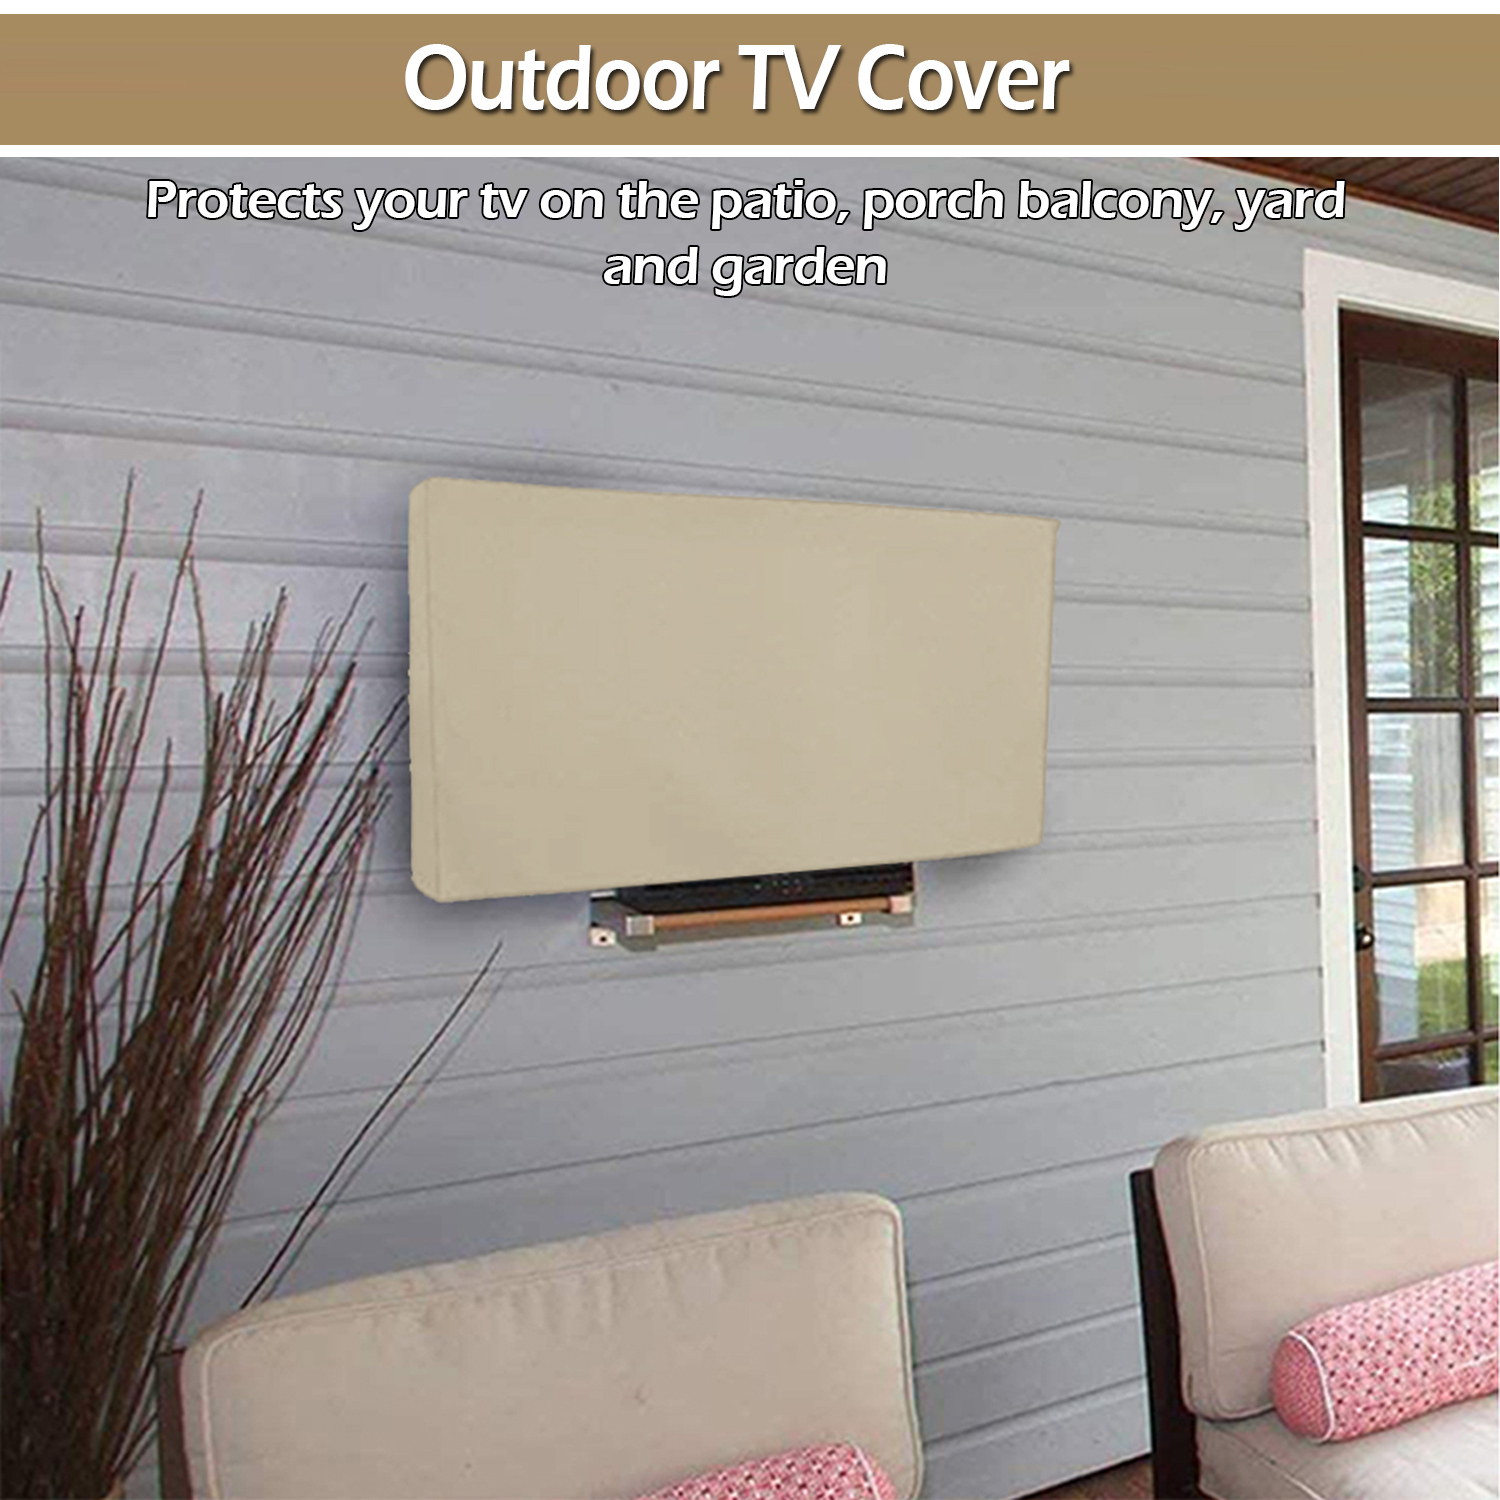 IC ICLOVER 40''-43" Outdoor Weatherproof LCD Plasma TV/Television Cover Flat Screen TV/Television Dustproof Protector with Waterproof Remote Pocket, Beige - image 2 of 9